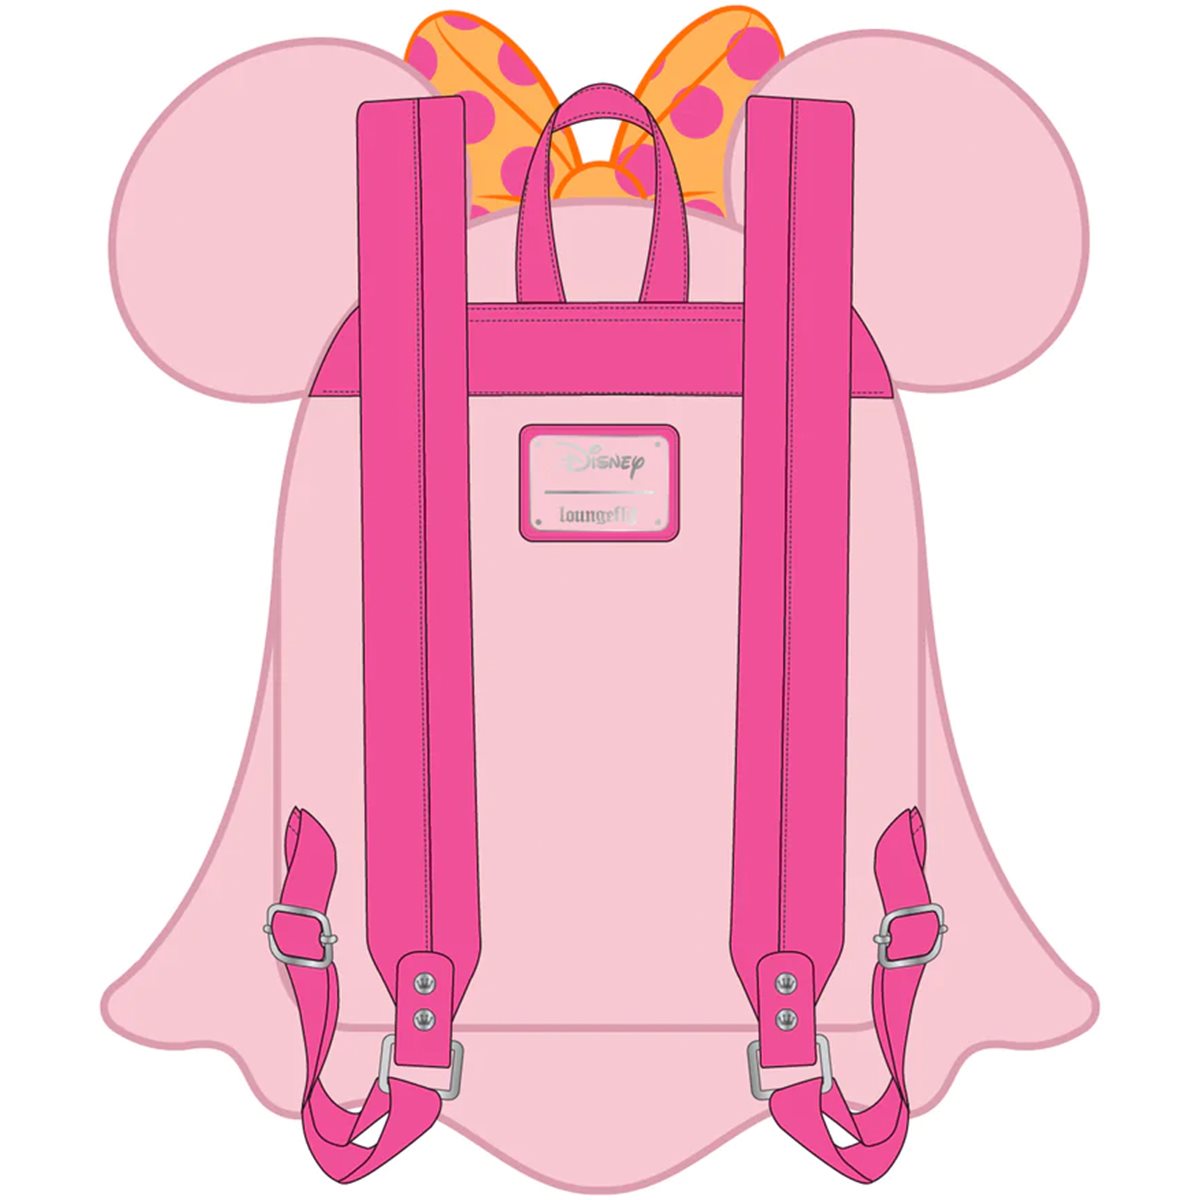 Buy Pastel Ghost Minnie Mouse Glow-in-the-Dark Mini Backpack at Loungefly.